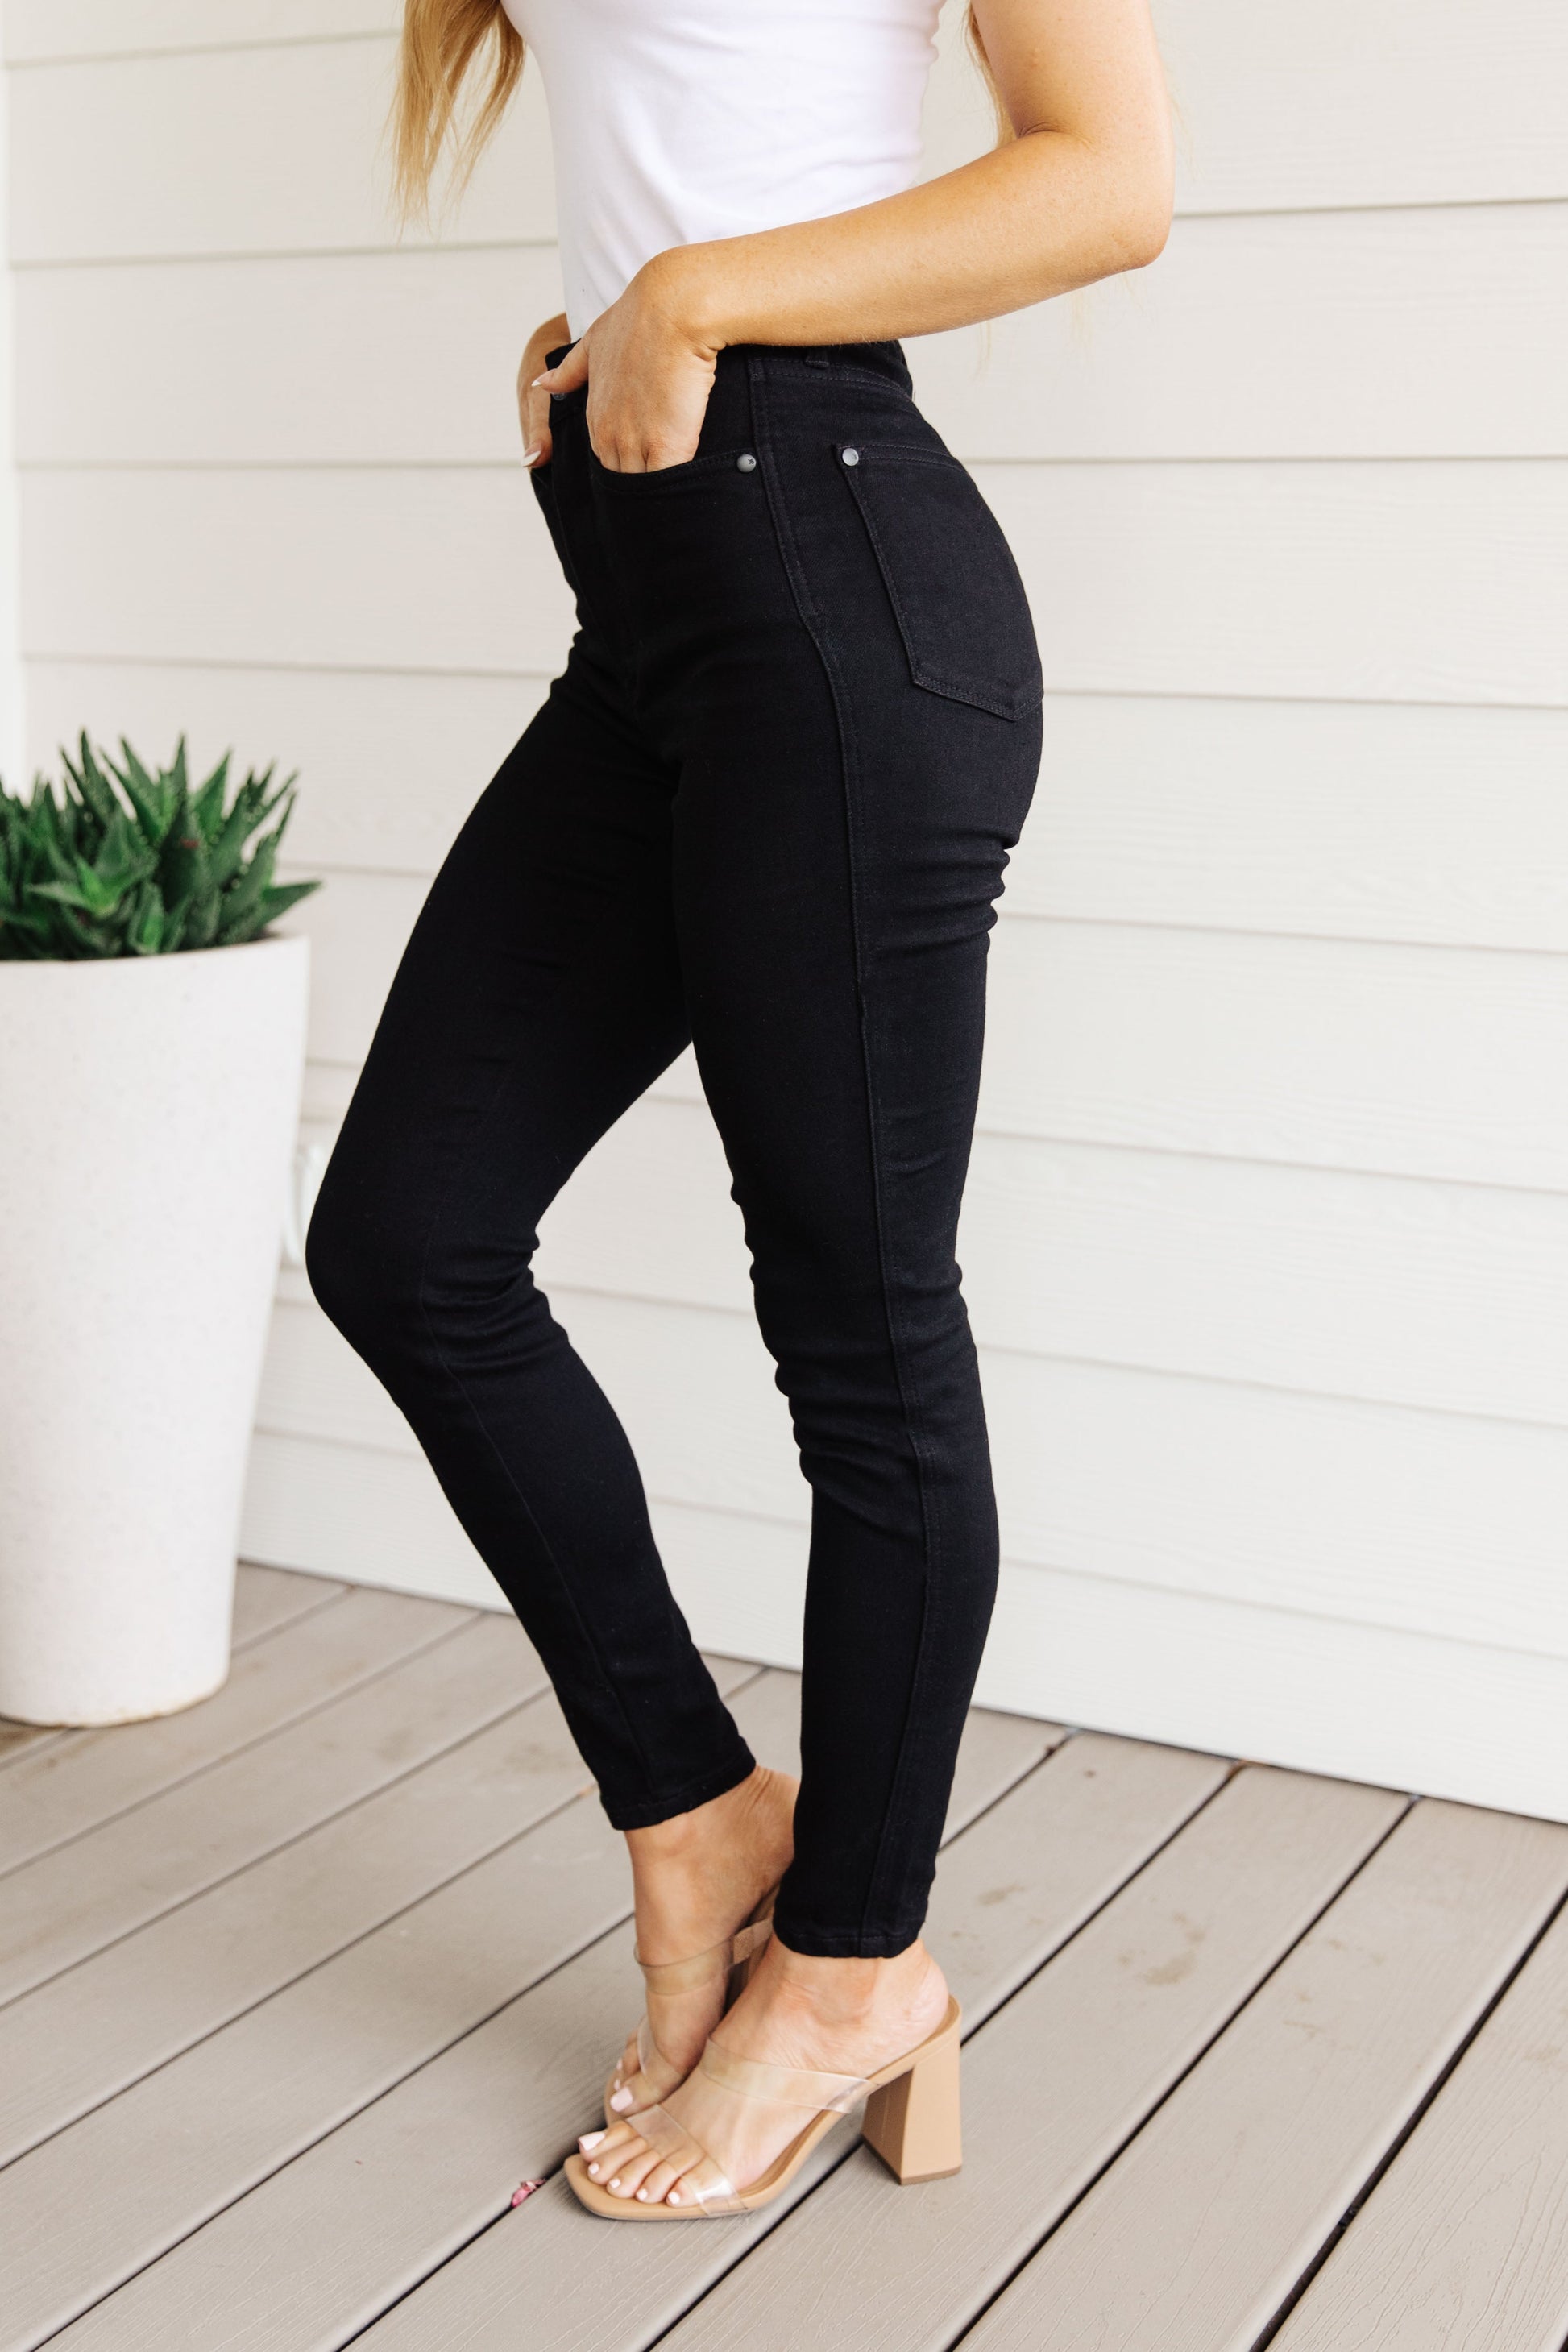 Audrey High Rise Control Top Classic Skinny Jeans in Black - Posh Country Lifestyle Marketplace